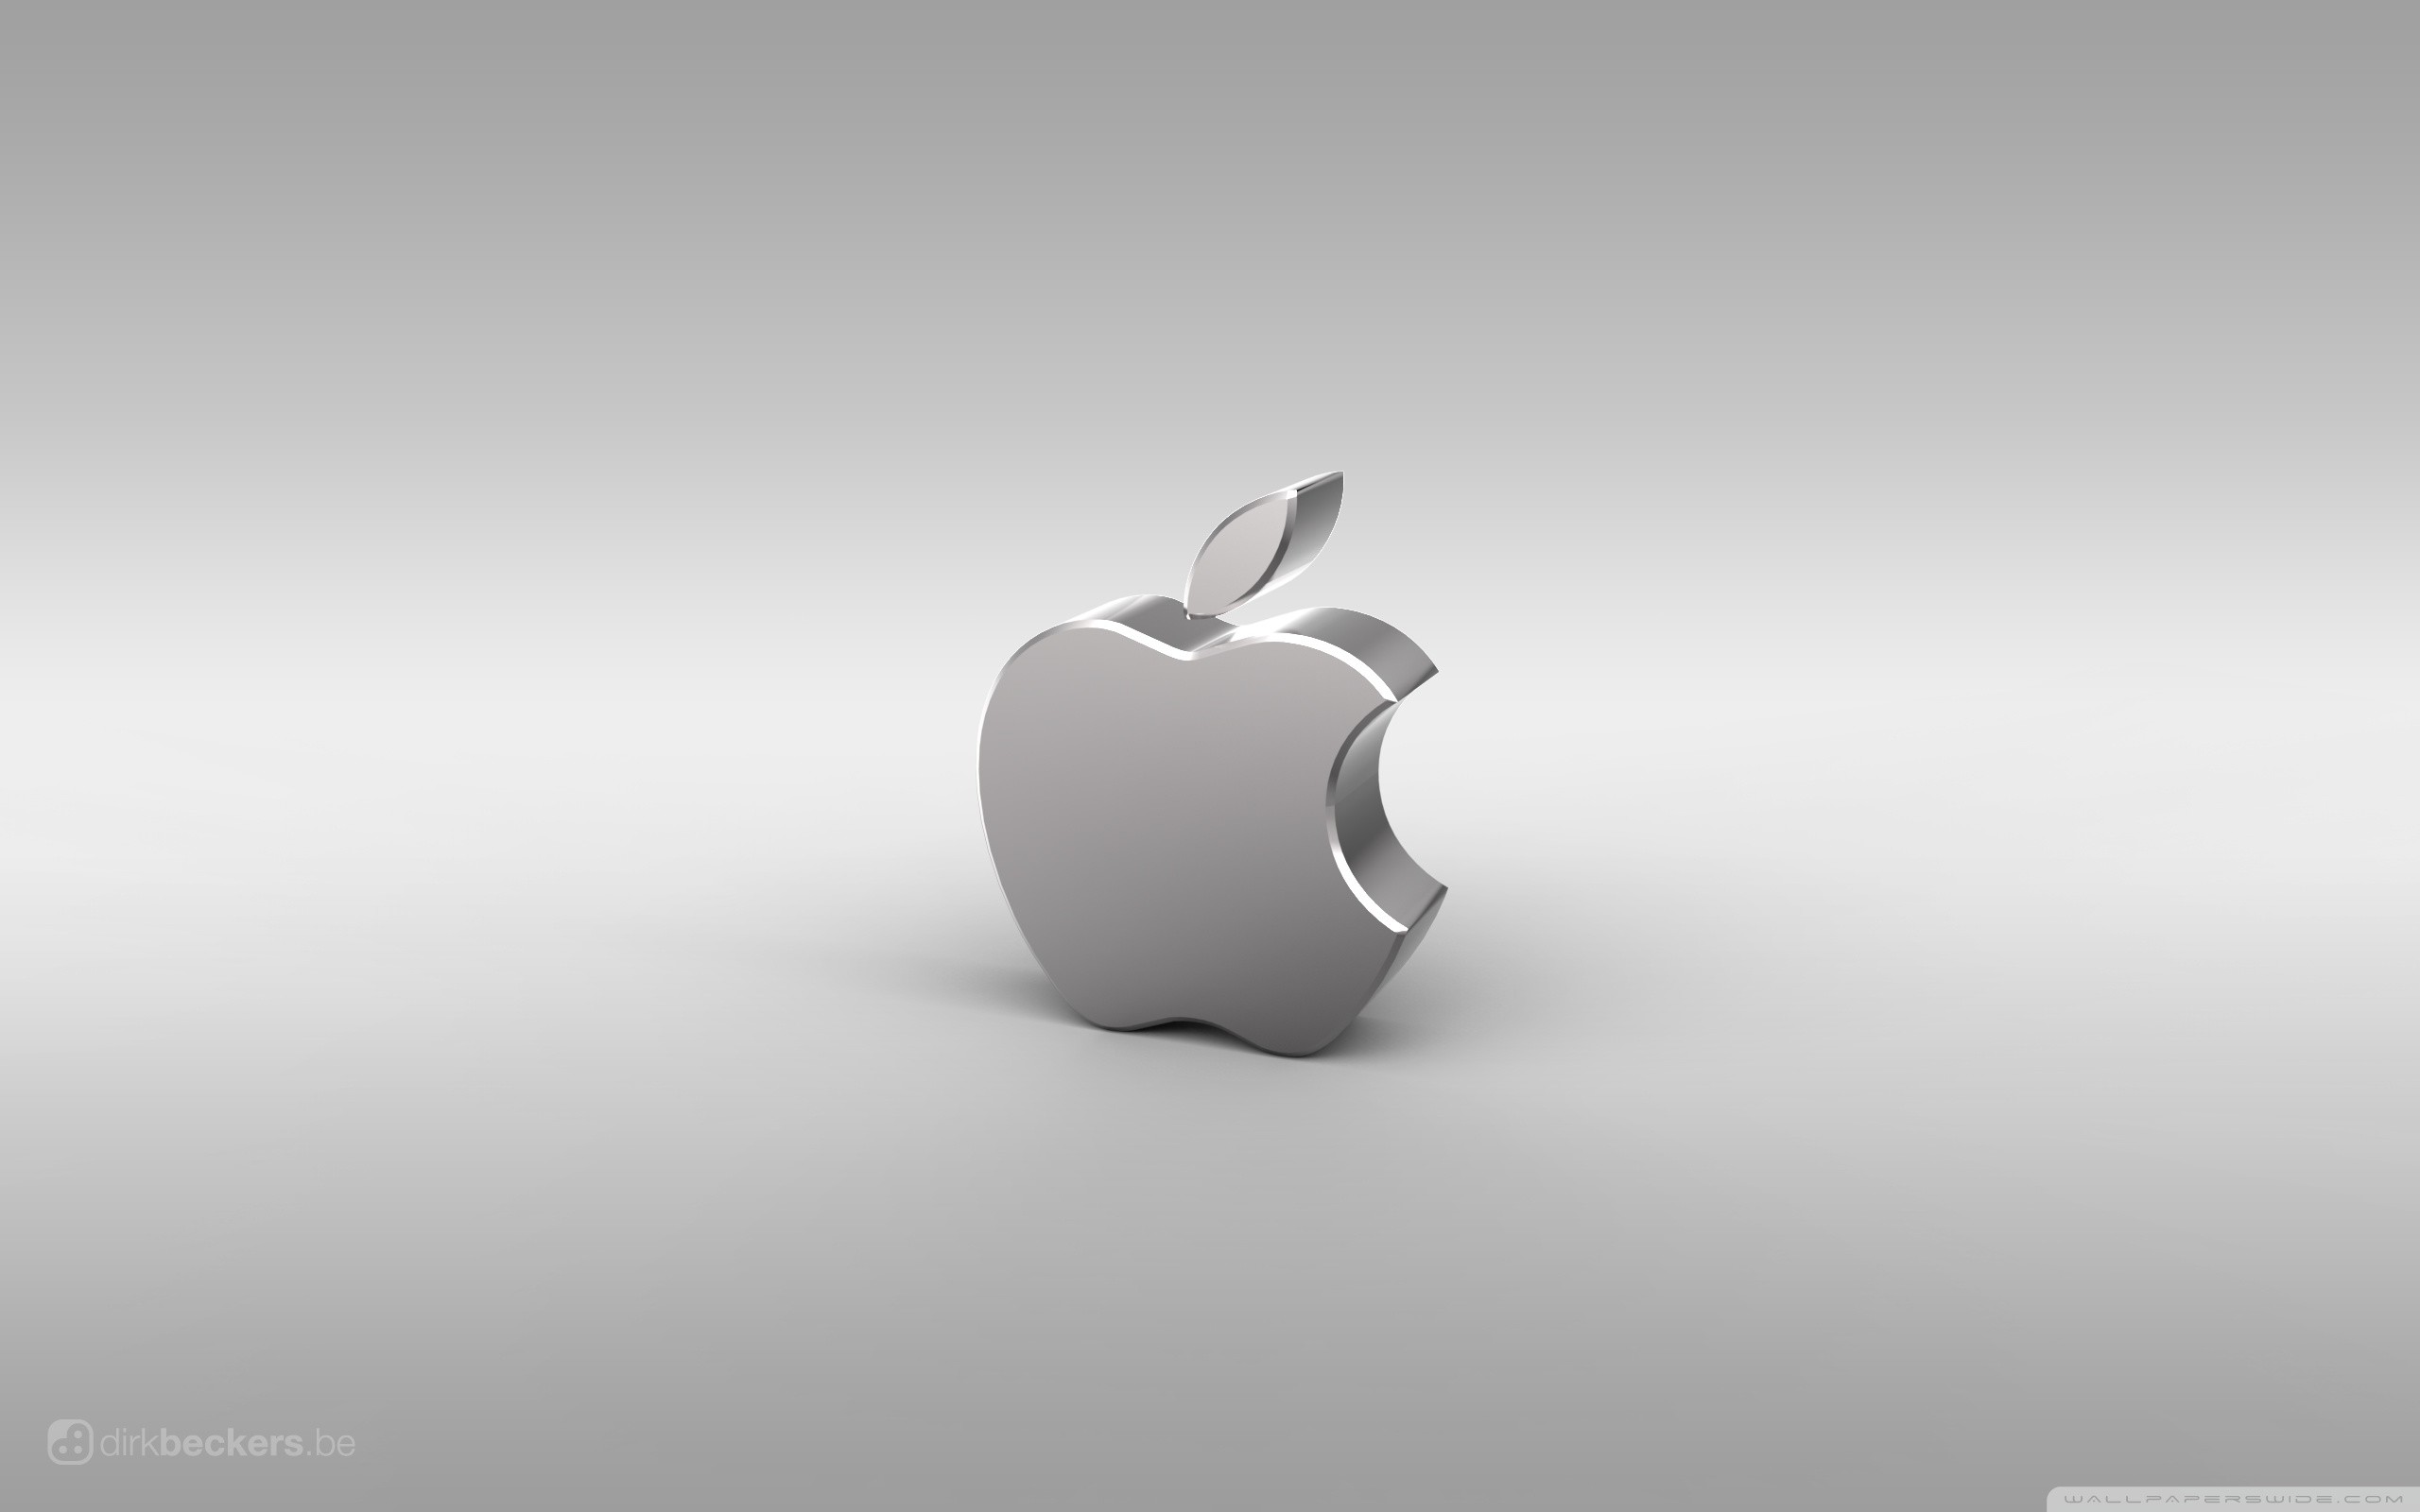 2560x1600 4:3 HGD.9595 Apple Pictures